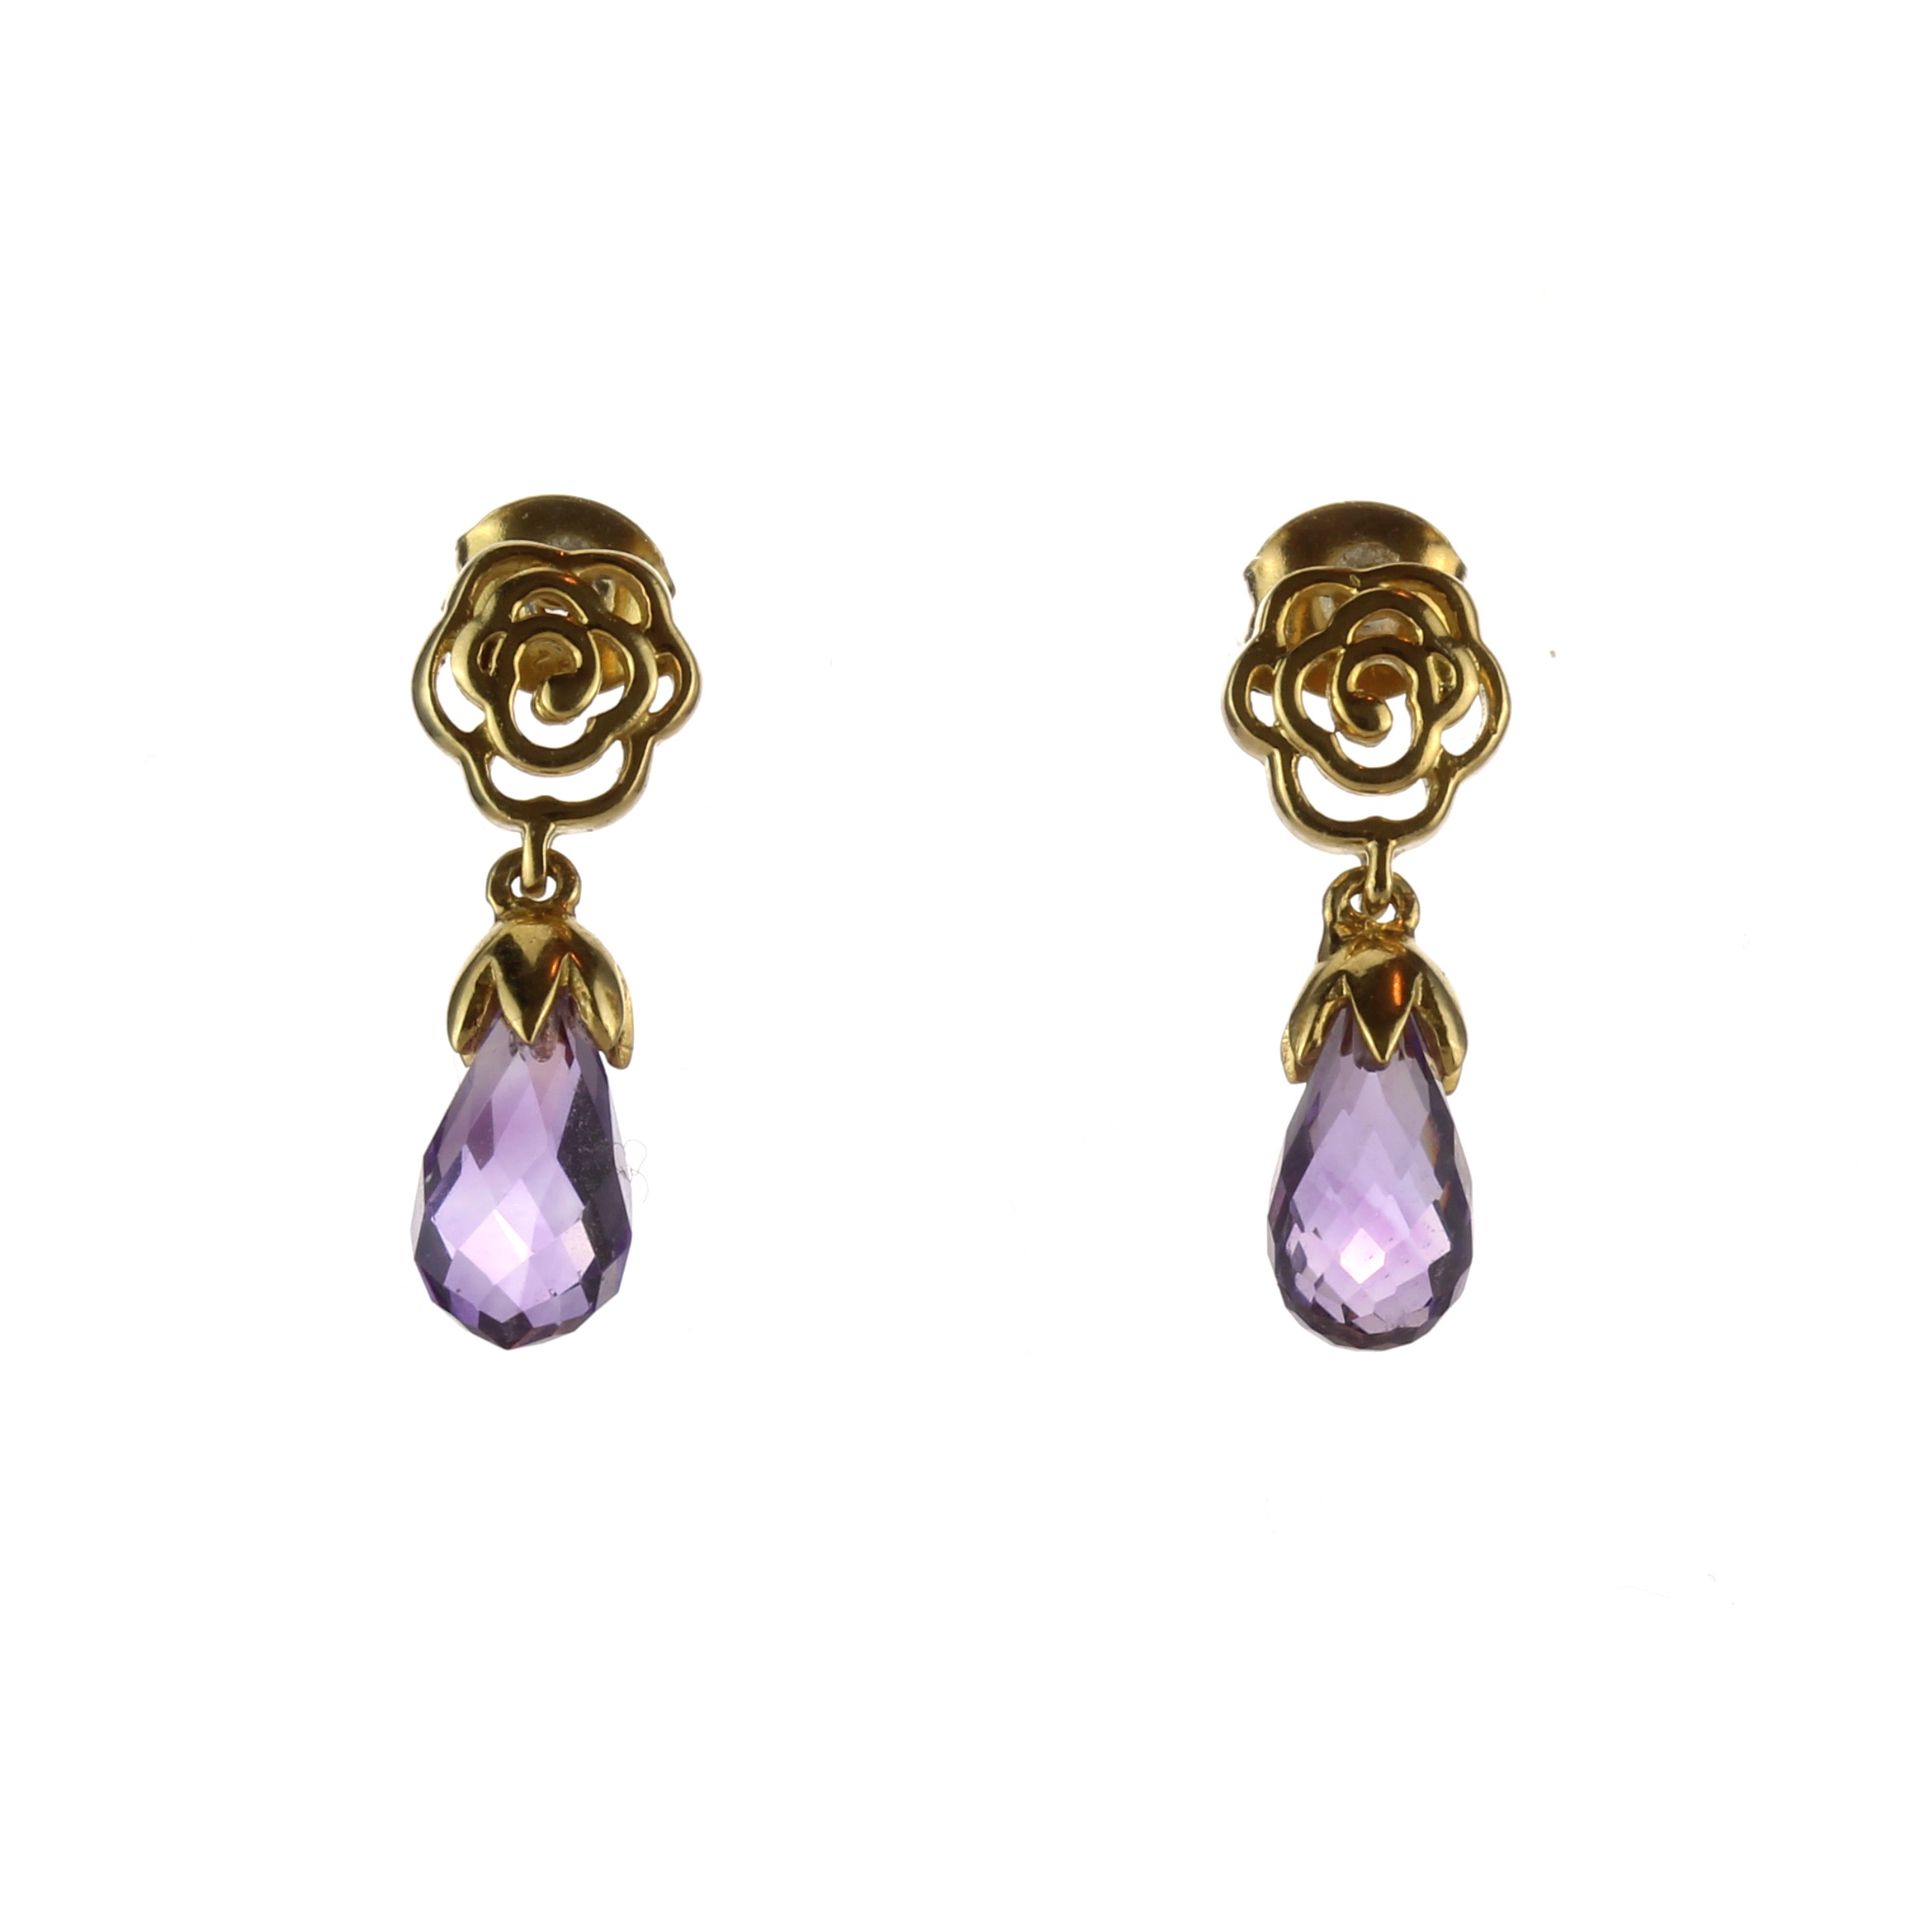 A pair of amethyst drop earrings in gold plated silver each designed as a briolette cut amethyst